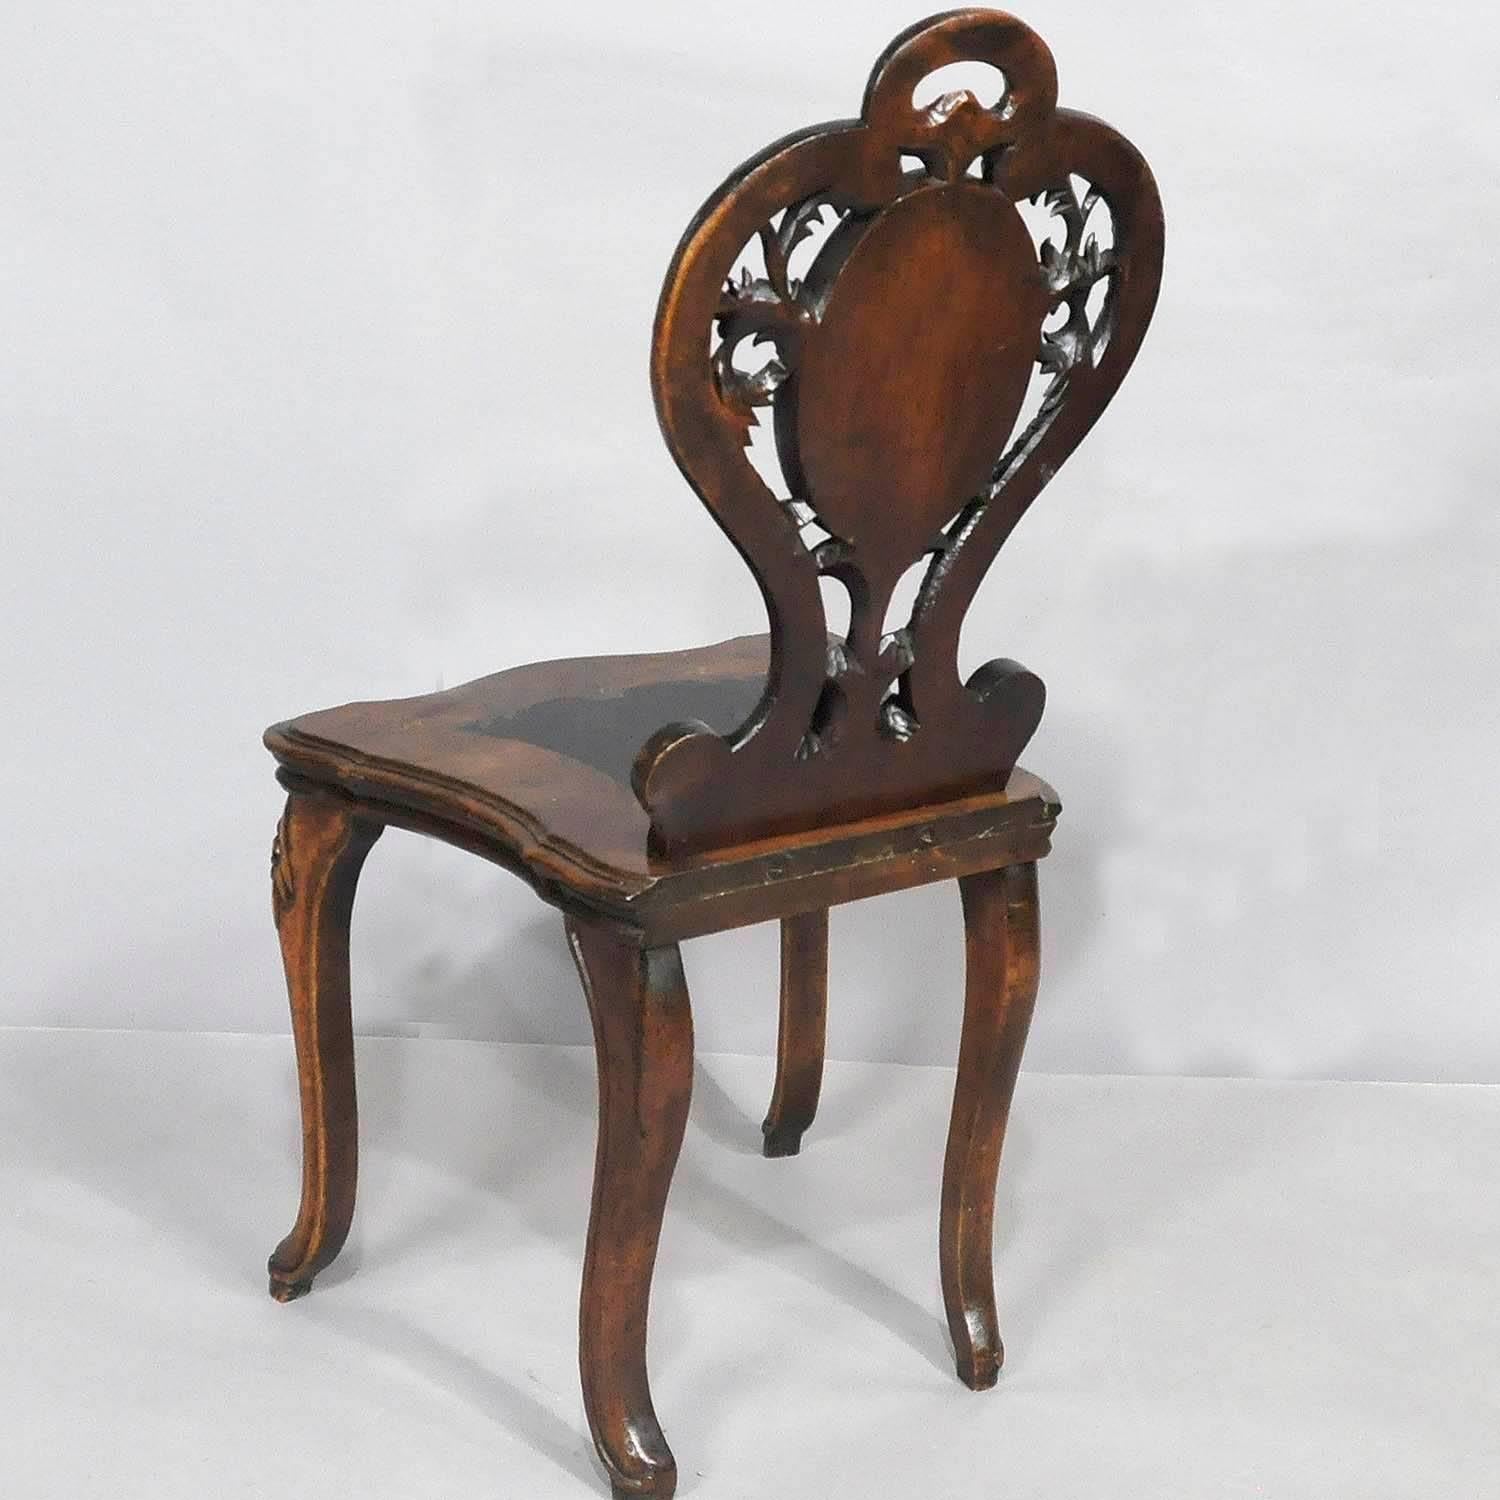 Nutwood Black Forest Carved and Inlaid Walnut Chair, Swiss, 1900